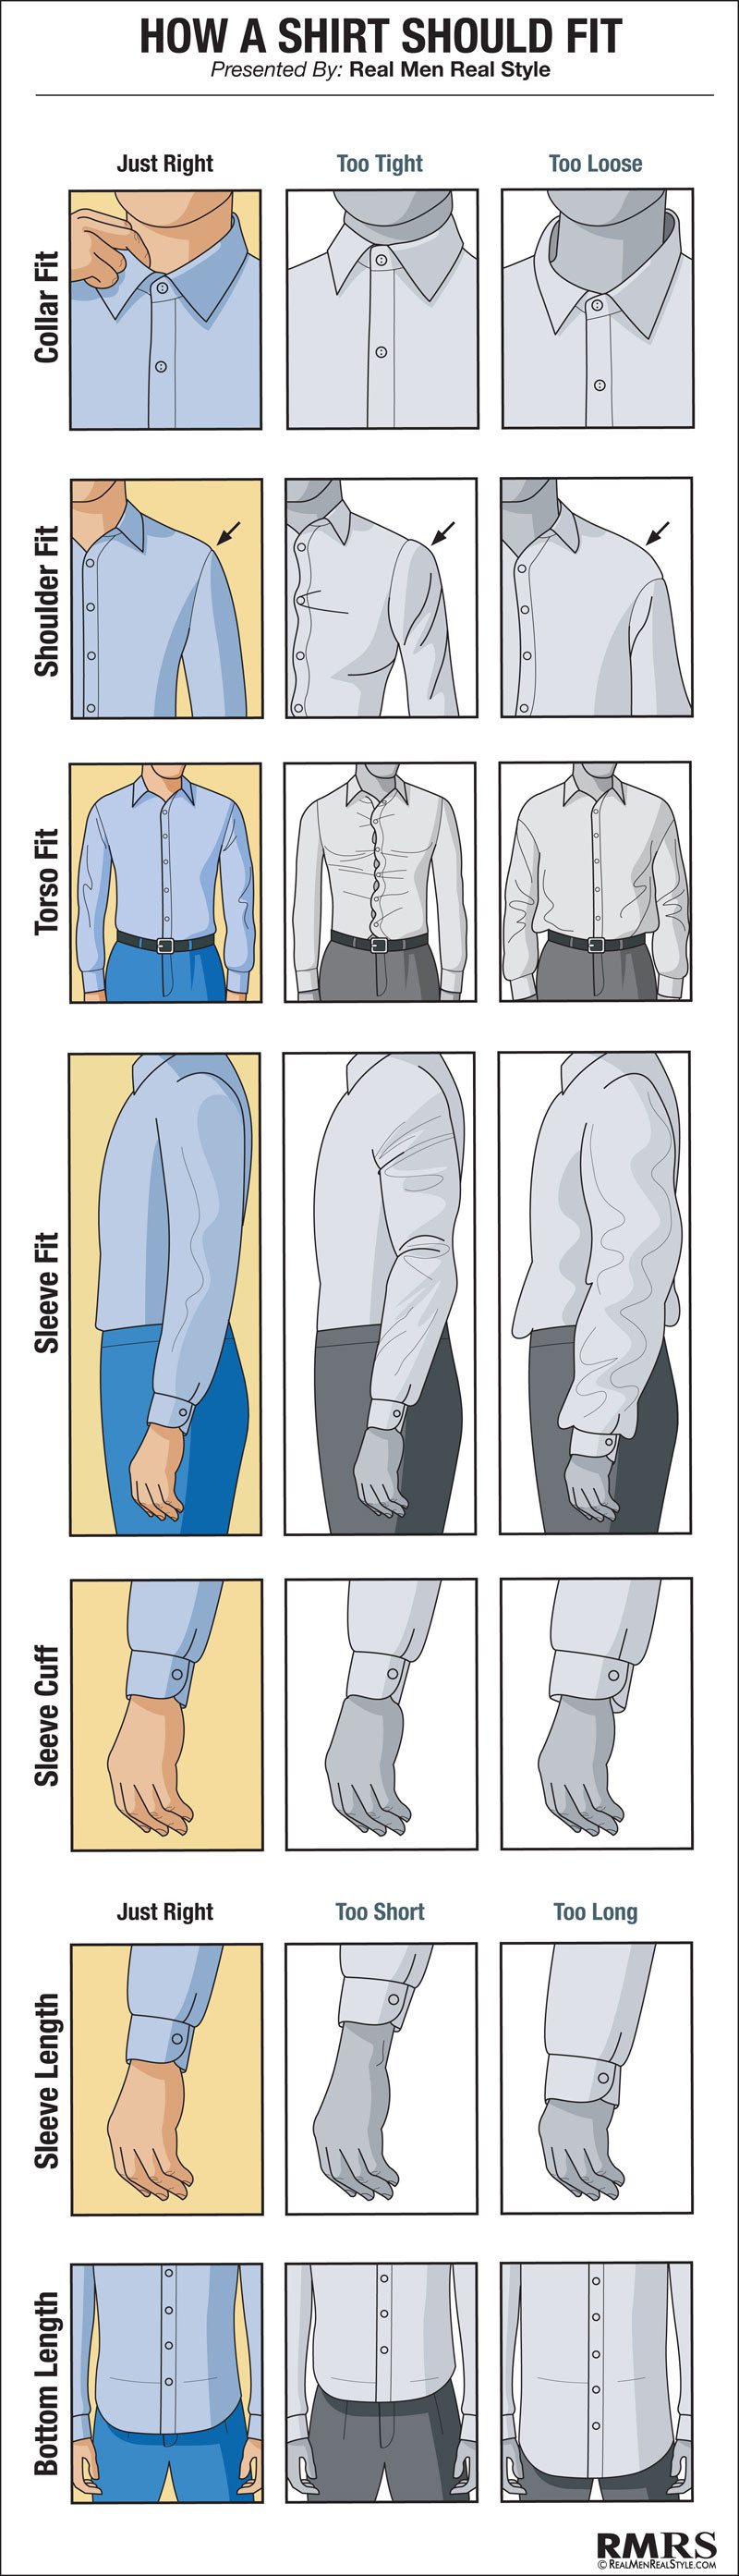 How-A-Shirt-Should-Fit-Infographic-RMRS-